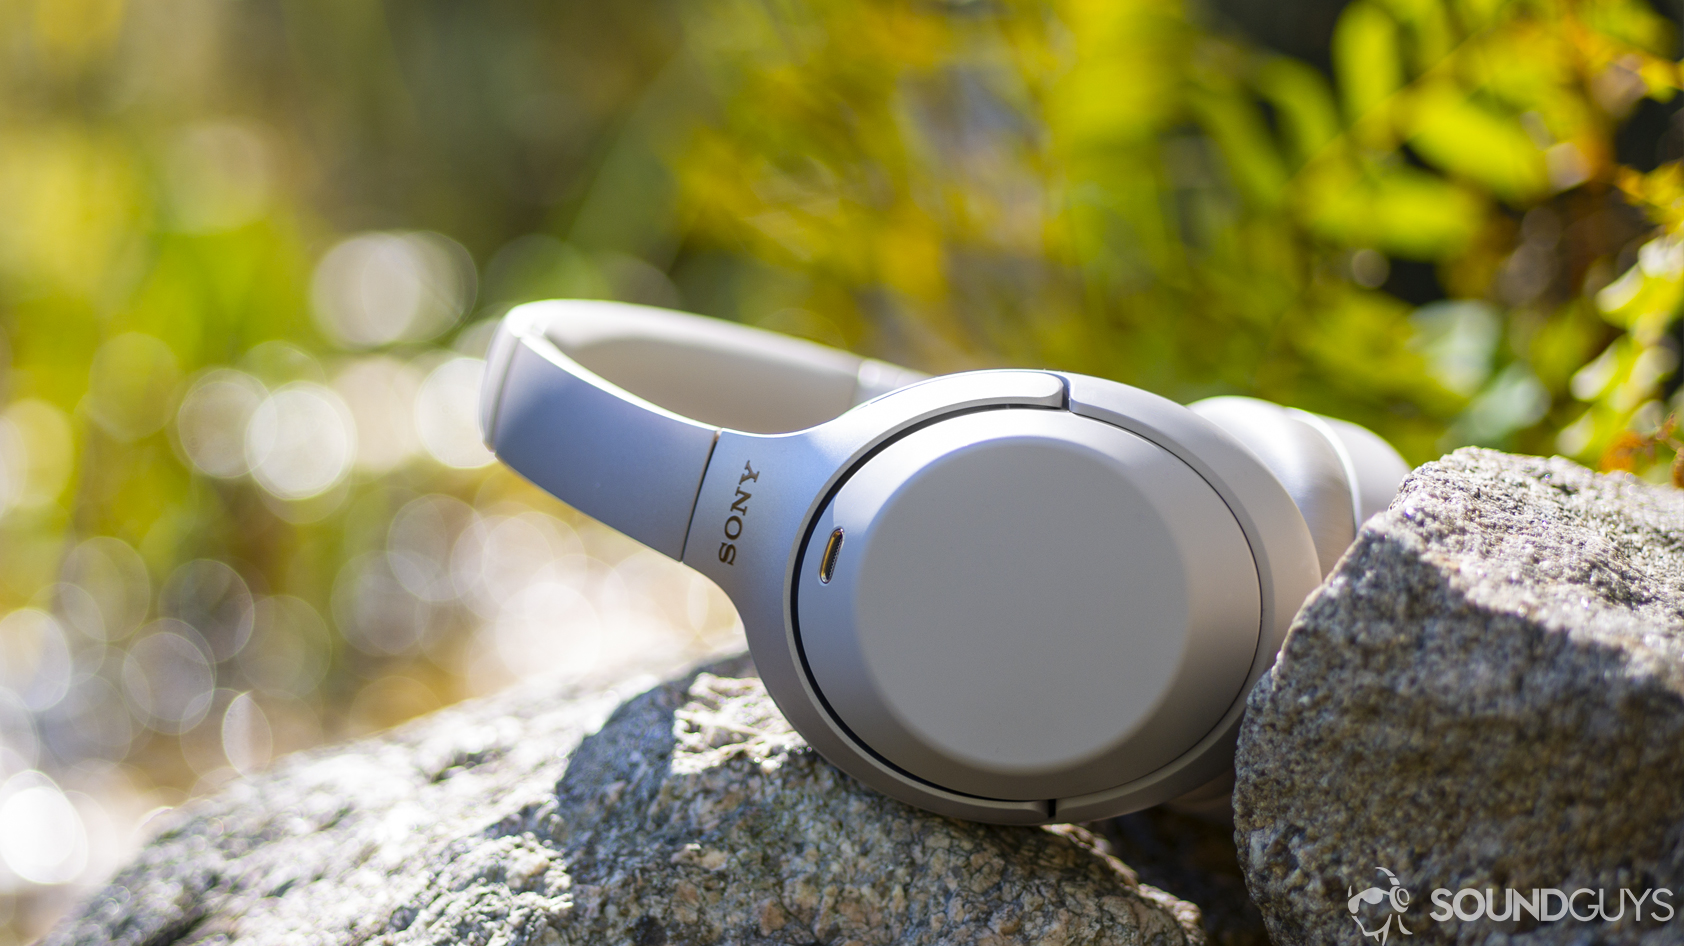 Samsung Galaxy S10 headphone: A photo of the Sony WH-1000XM3 sitting on a stone wall.